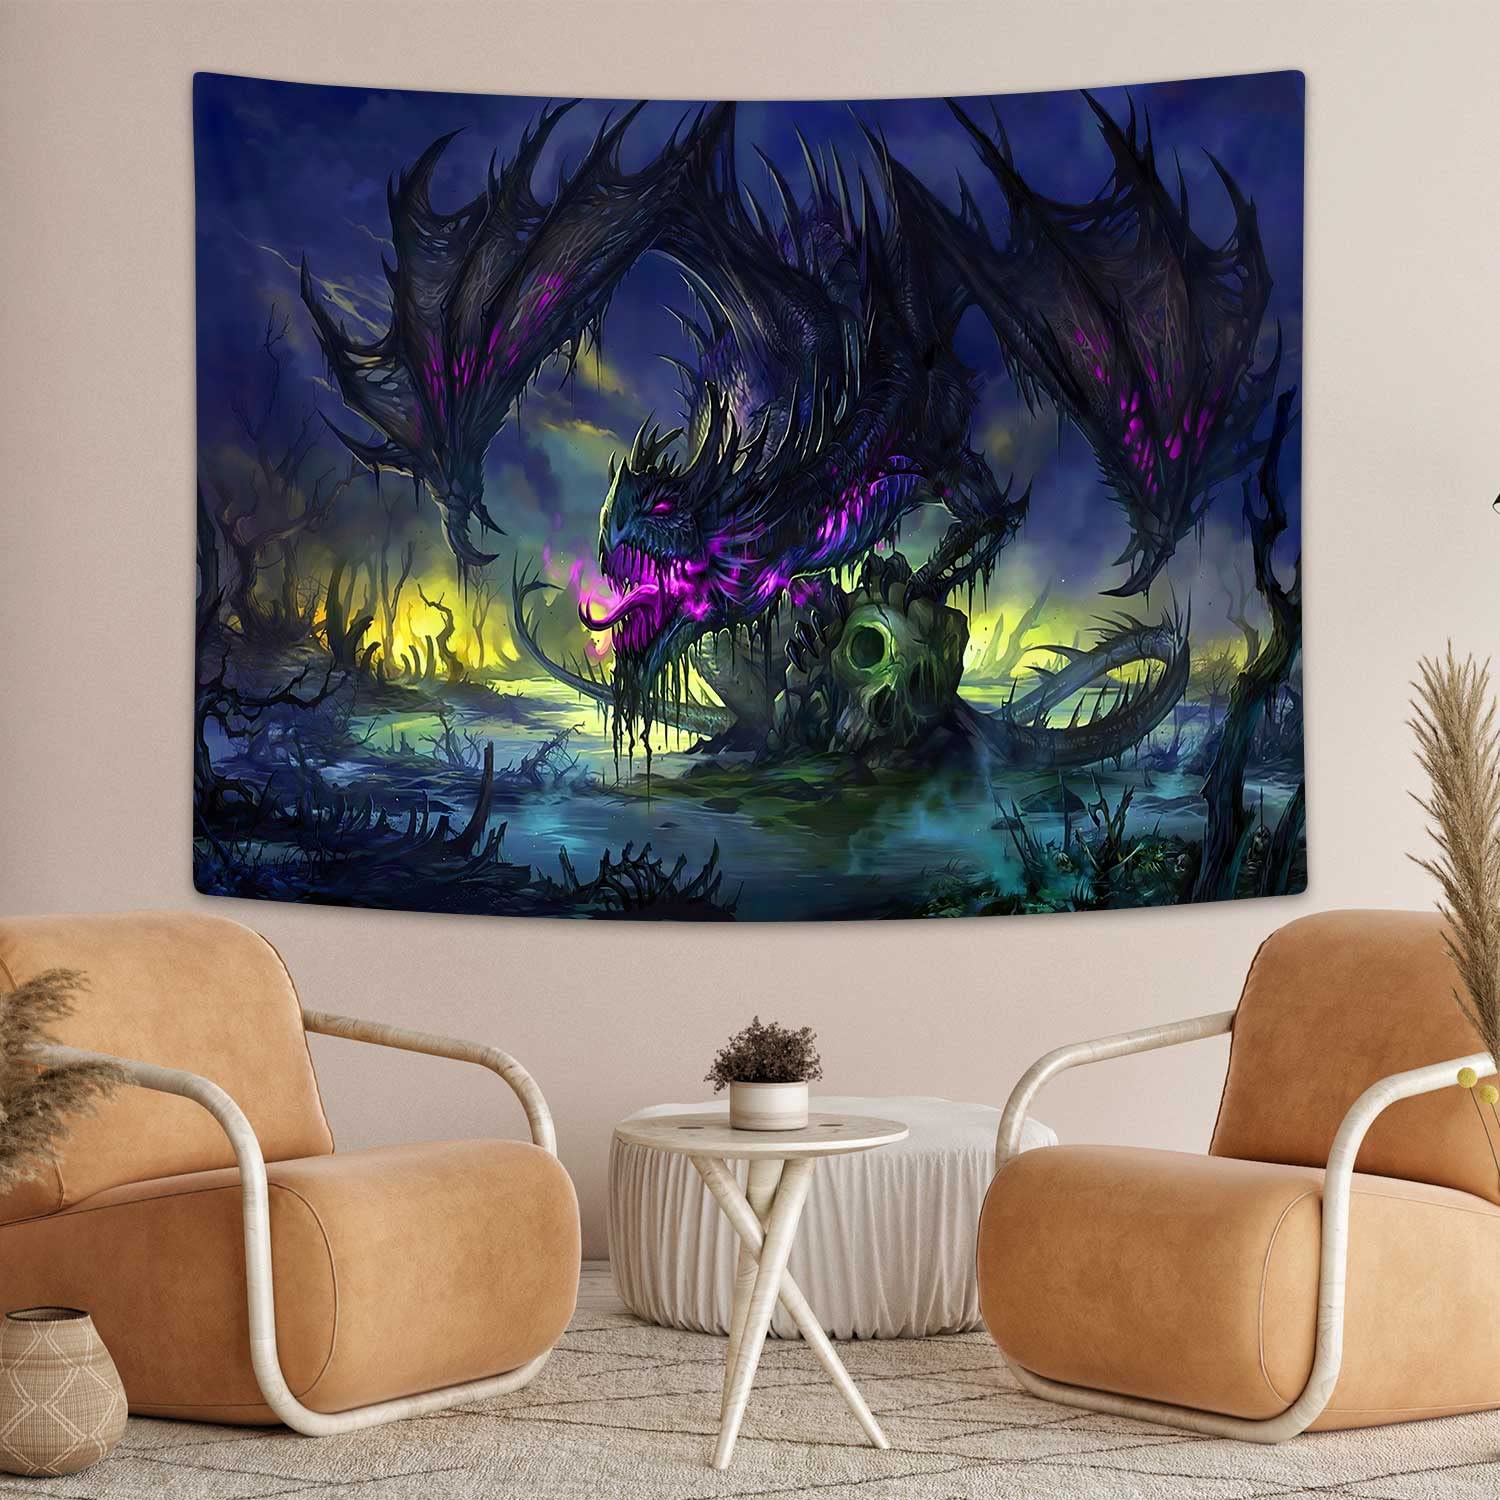 Medieval Dragon Tapestry Wall Hanging Fabric Hippie Beach Blanket Living Room  Decor Bedroom Background Carpet Cloth Covering - AliExpress